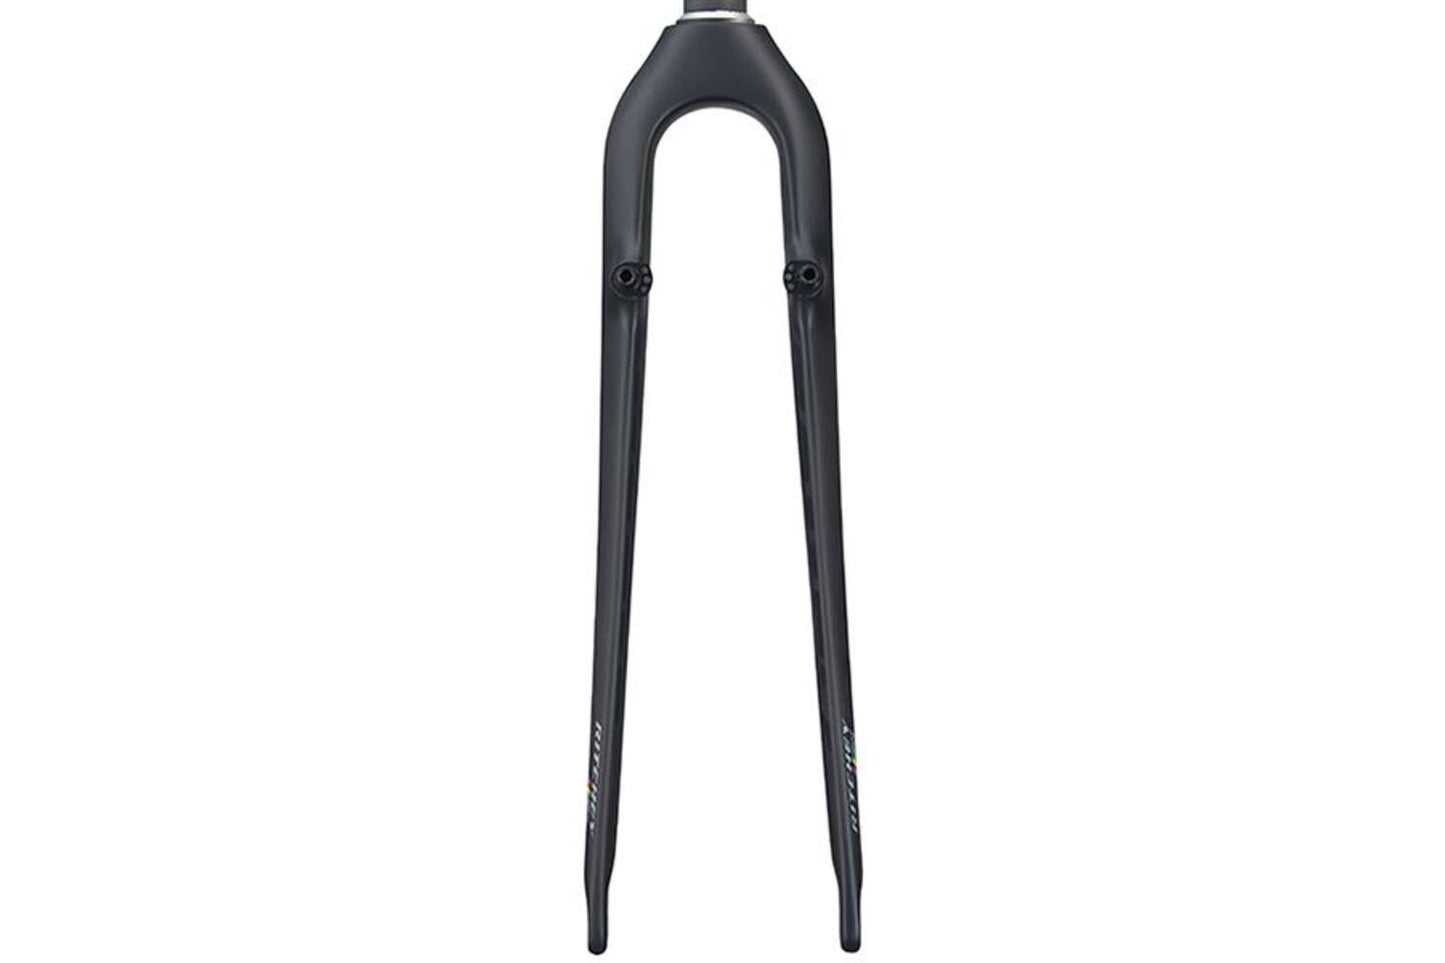 Ritchey Vork cross wcs ud mat carbon canty 1-1 8'' 45mm